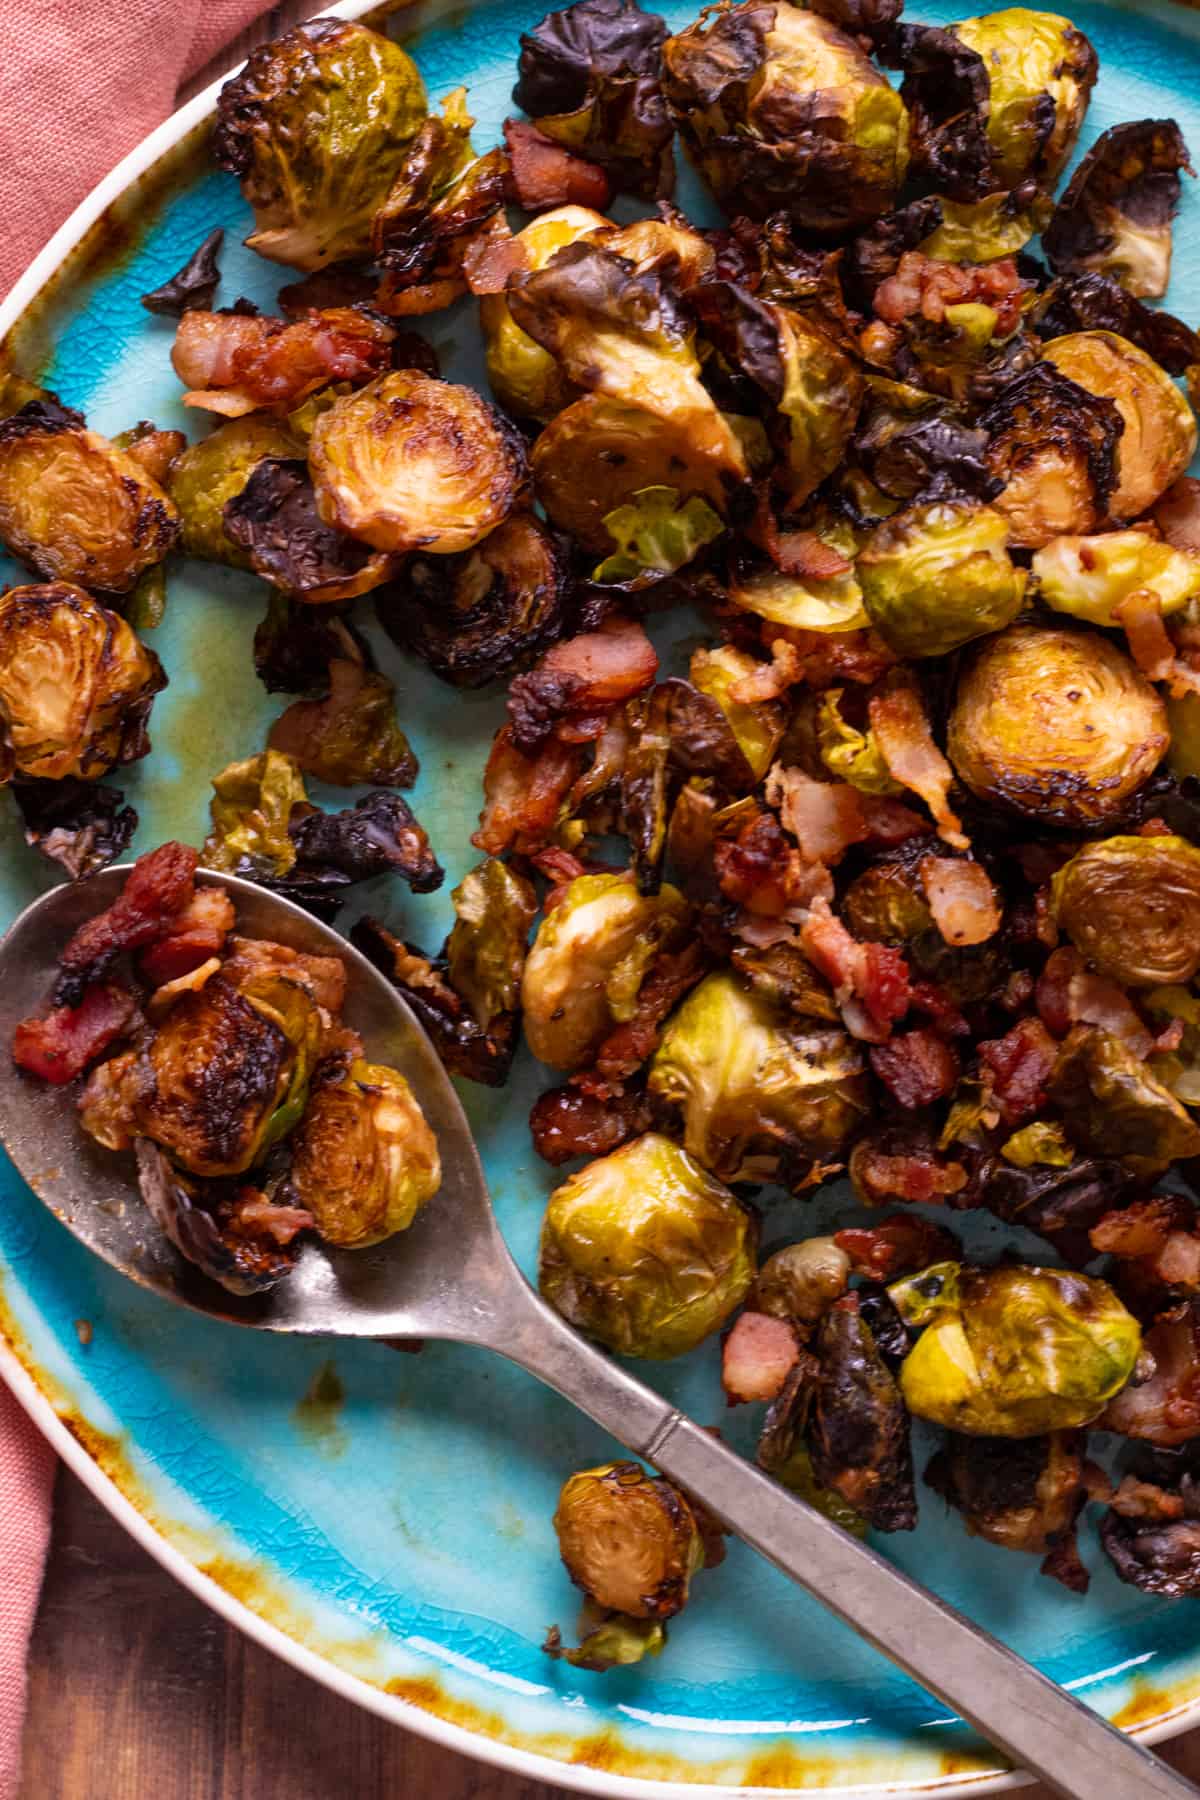 brussel sprouts with bacon on a blue plate.